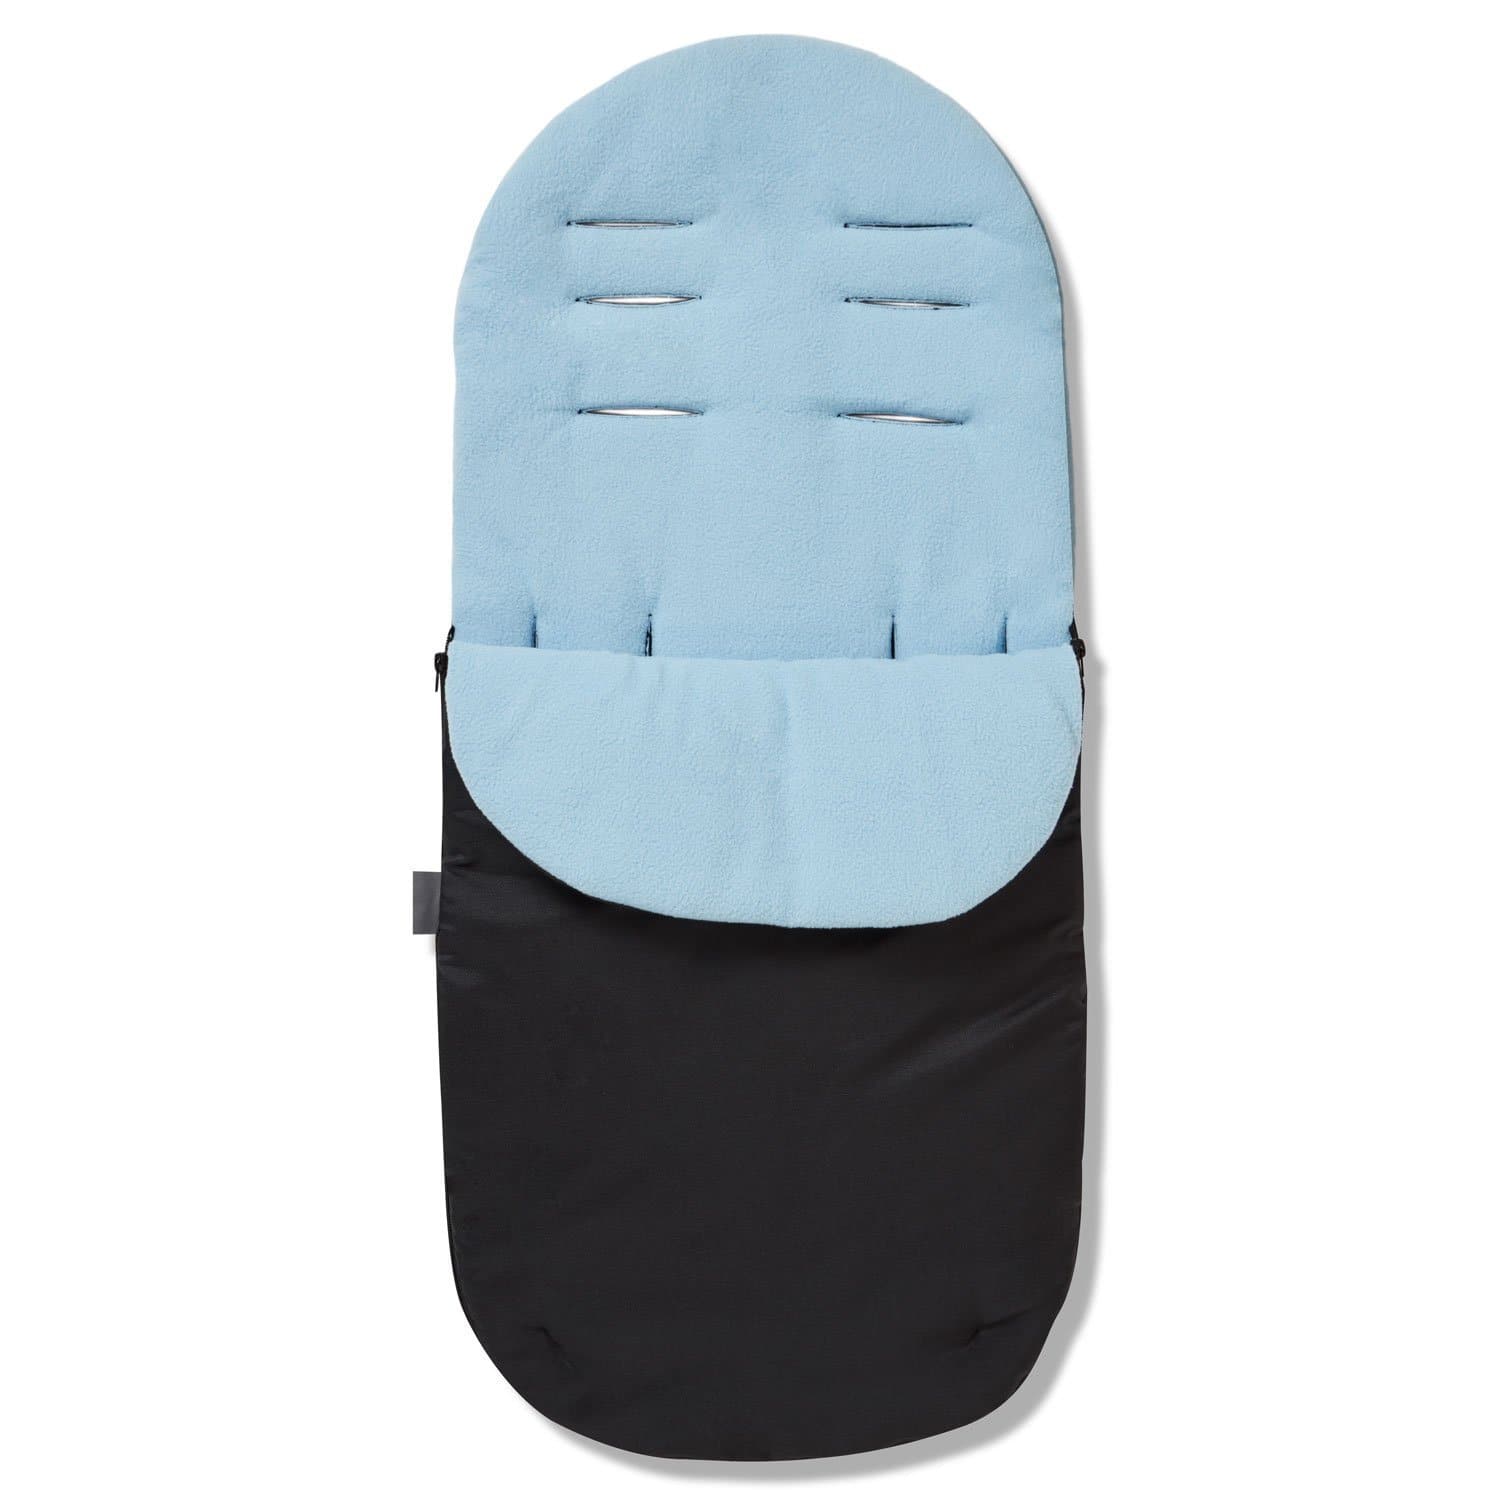 Footmuff / Cosy Toes Compatible with Kiddicouture - Light Blue / Fits All Models | For Your Little One